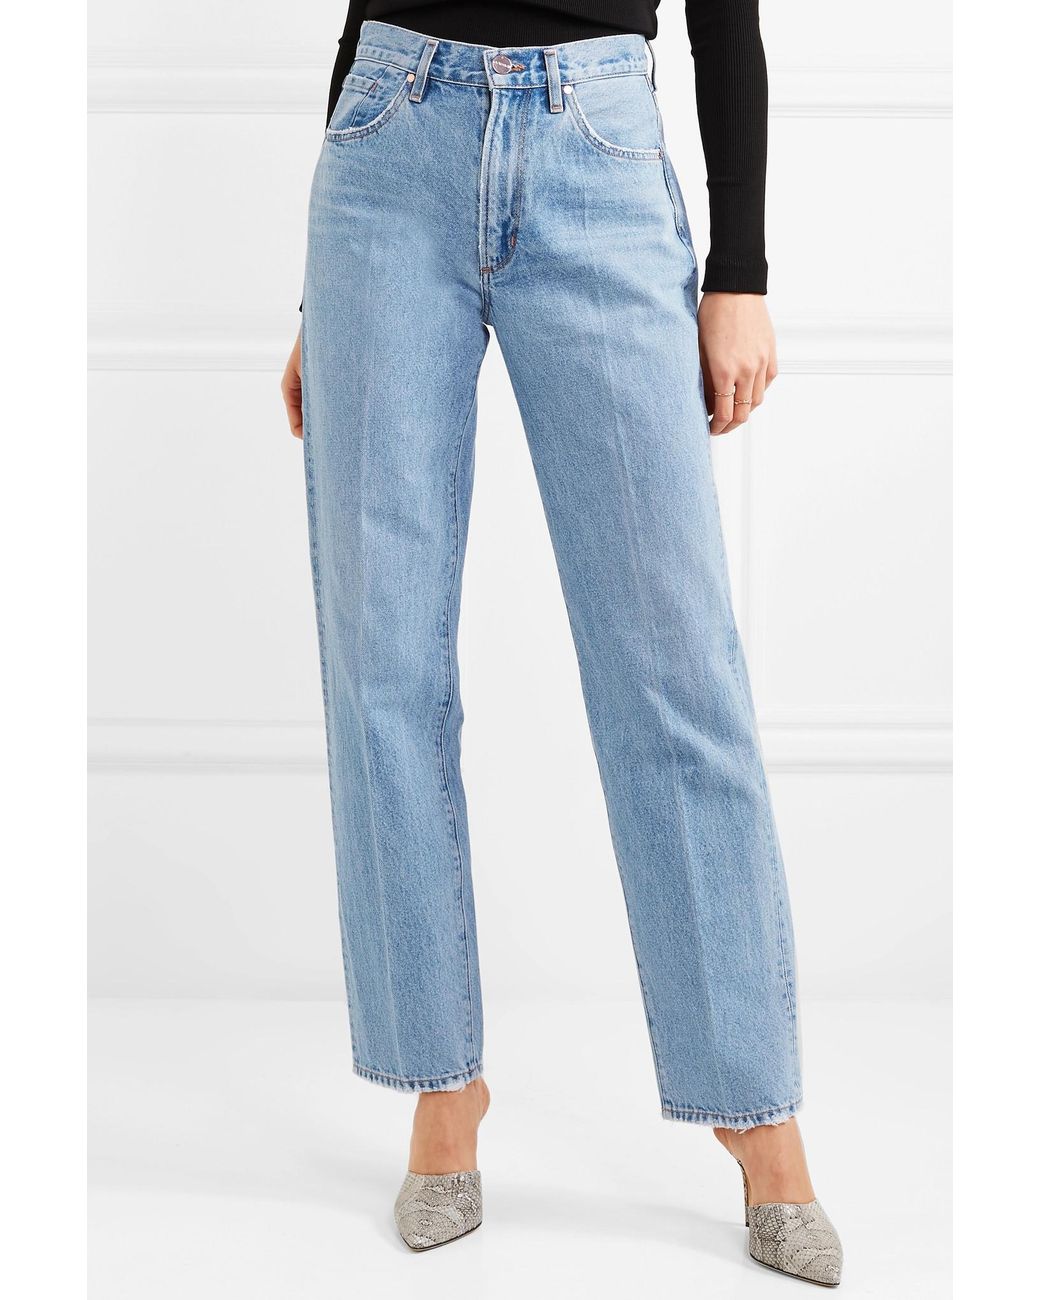 Goldsign Denim The Cropped A High-rise Jeans Womens Jeans Goldsign Jeans 